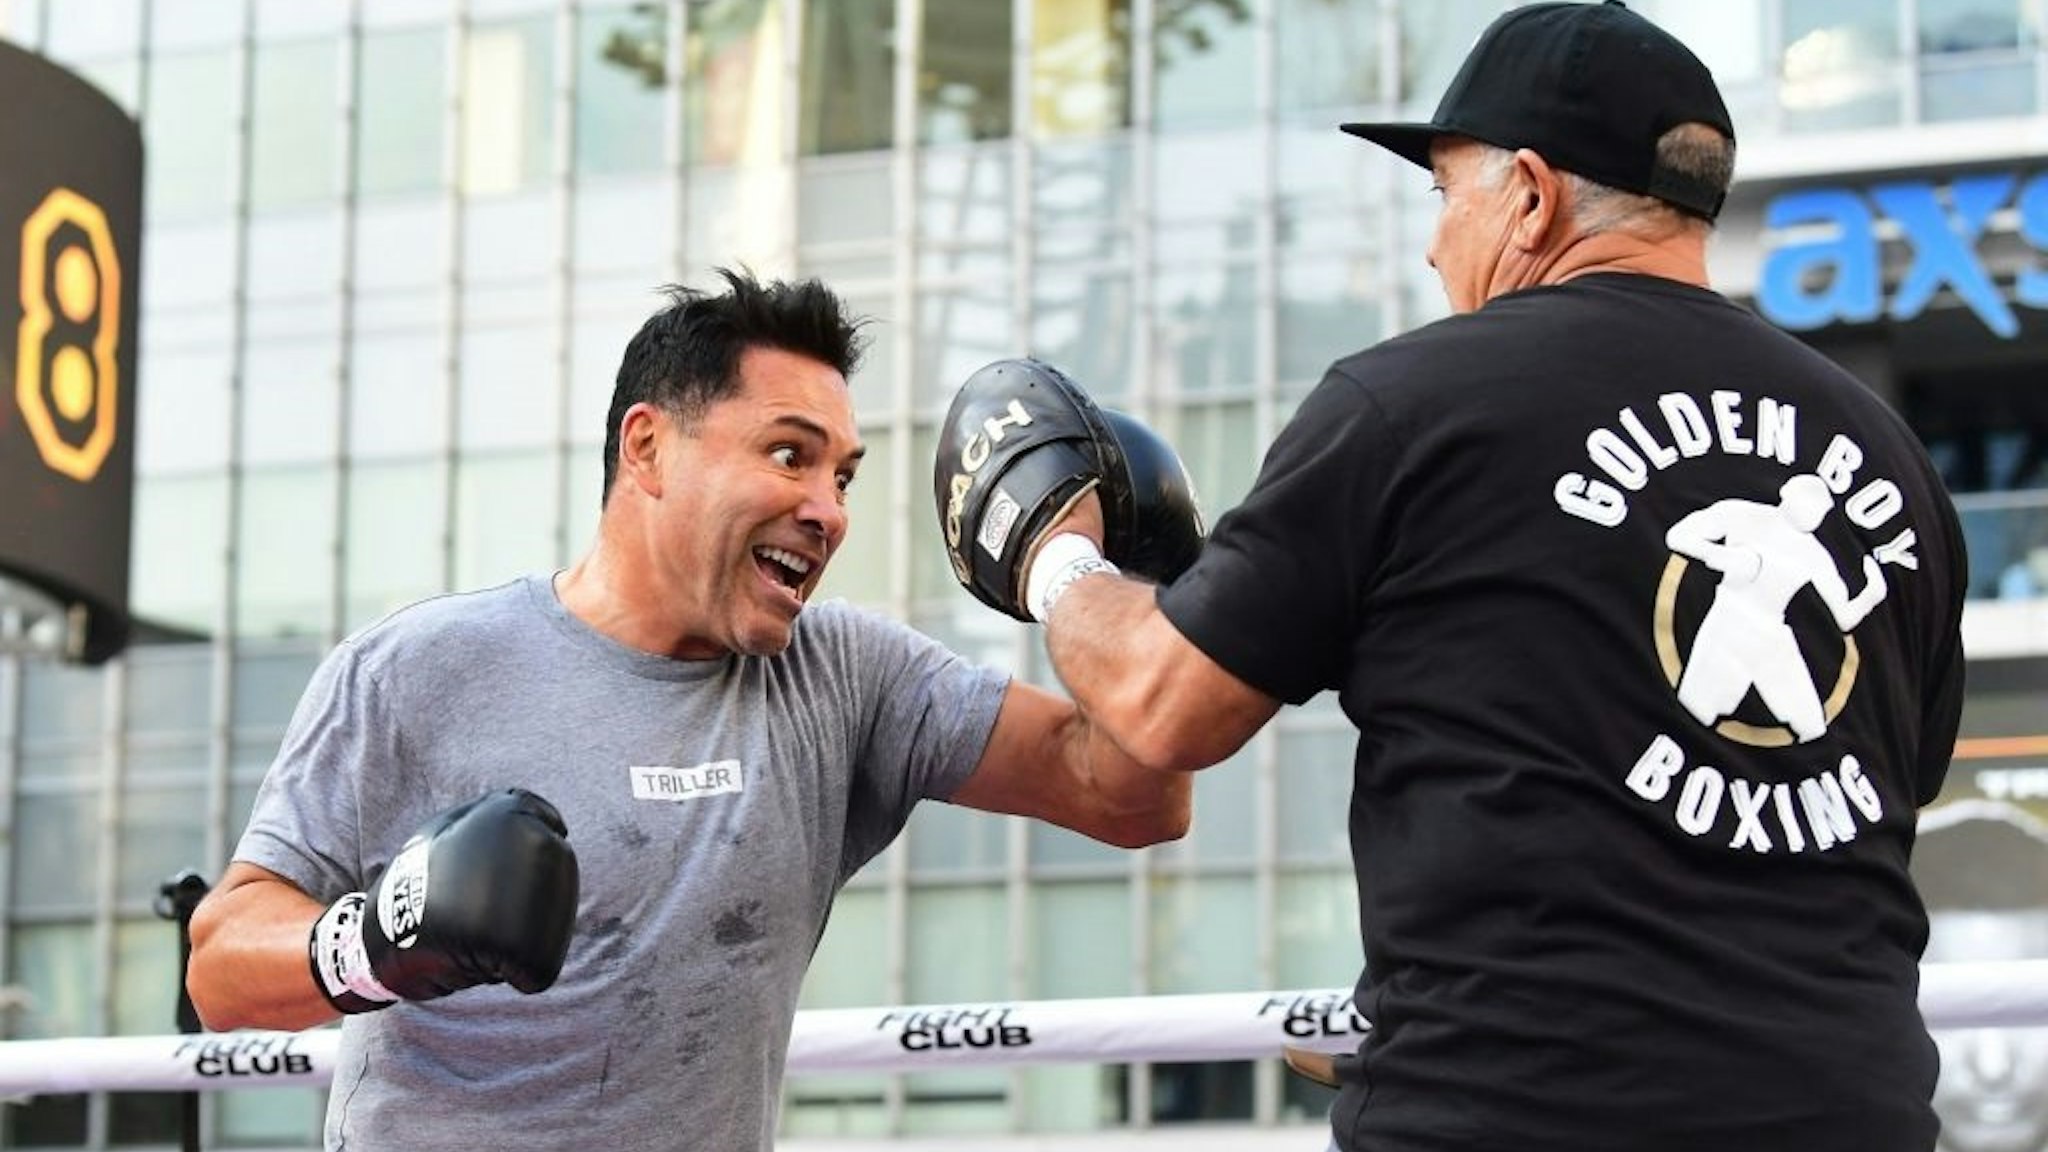 Former US Olympics Gold medalist professional boxer Oscar De La Hoya (L) spars with his partner during a public media workout in Los Angeles, California on August 24, 2021.